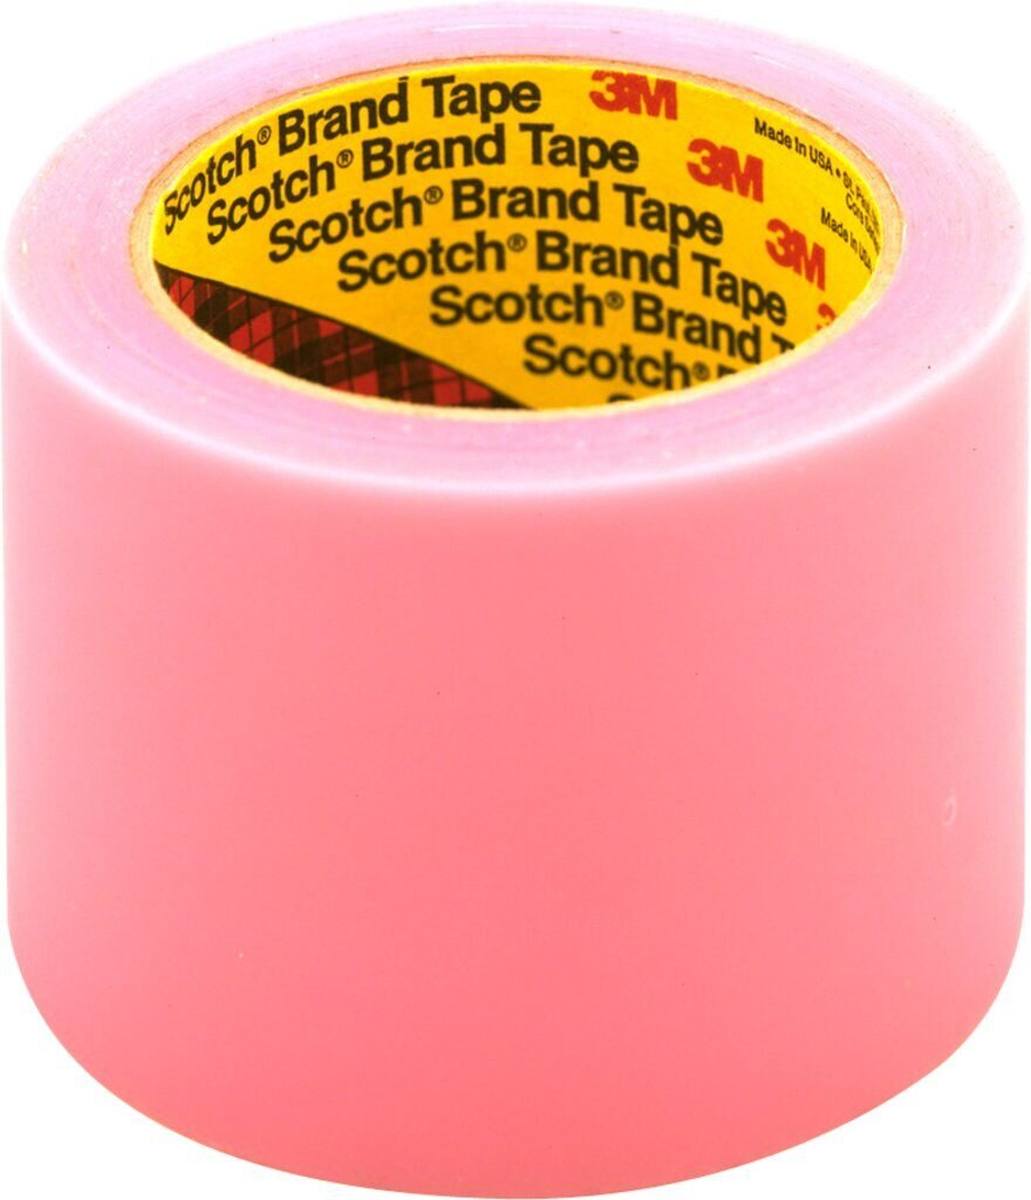 3M Scotch adhesive label protection tape 821, pink, 152.4 mm x 66 m, 0.063 mm